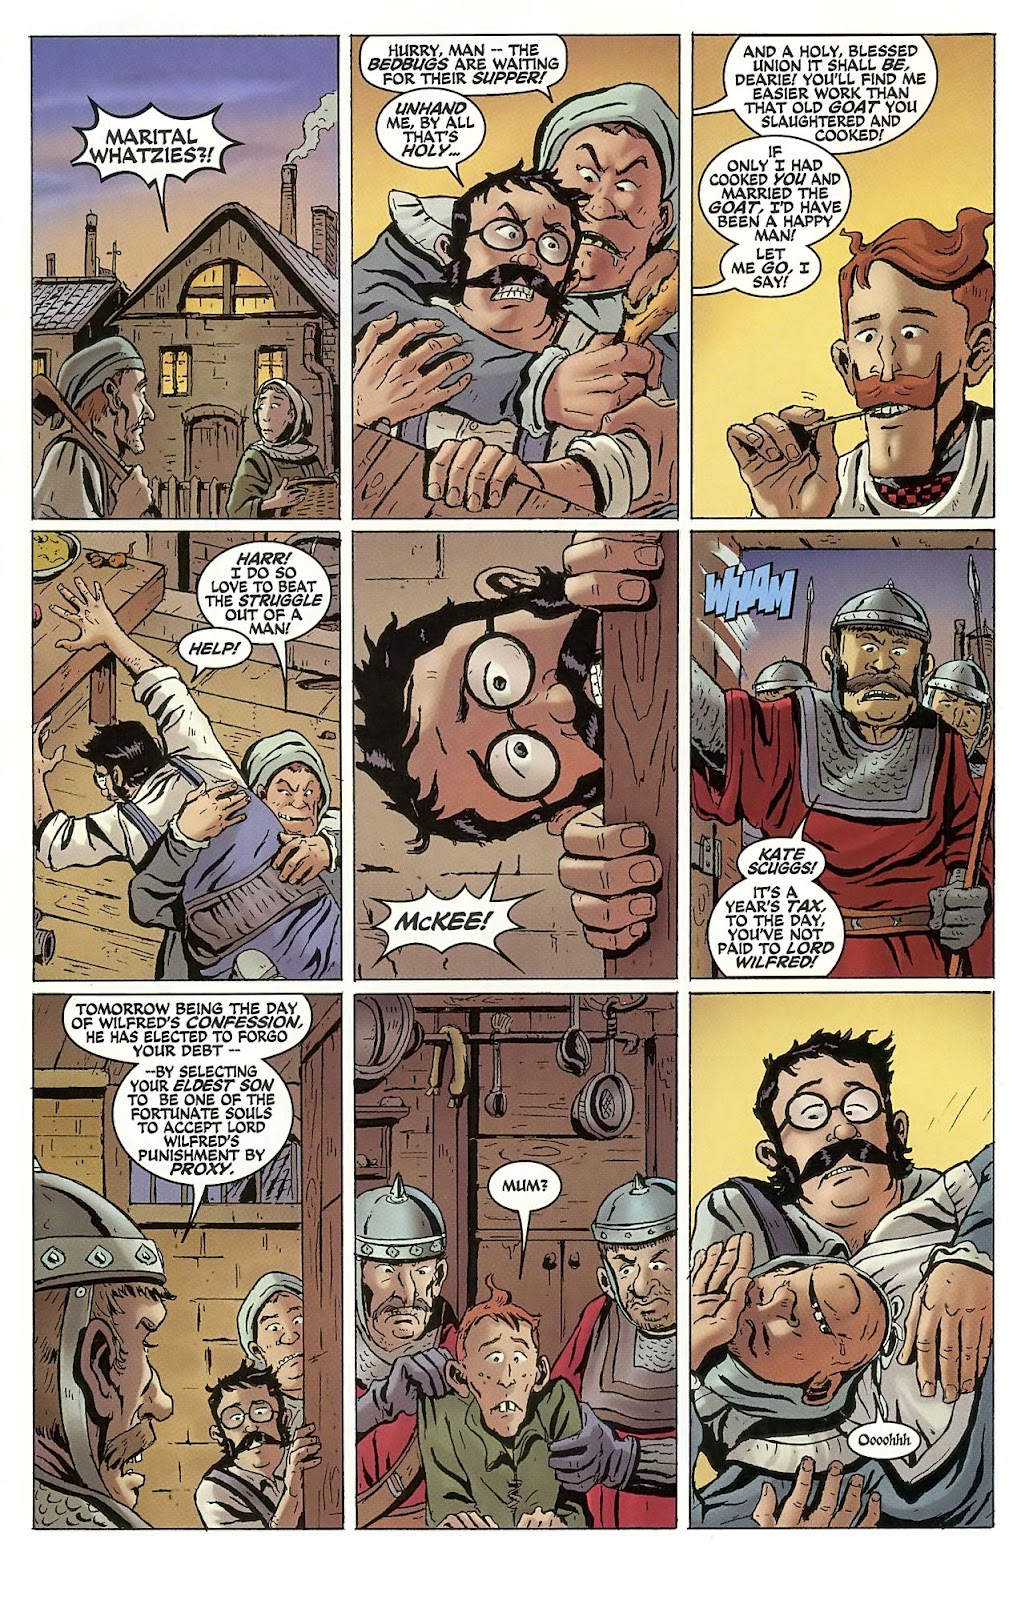 The Remarkable Worlds of Professor Phineas B. Fuddle issue 4 - Page 11